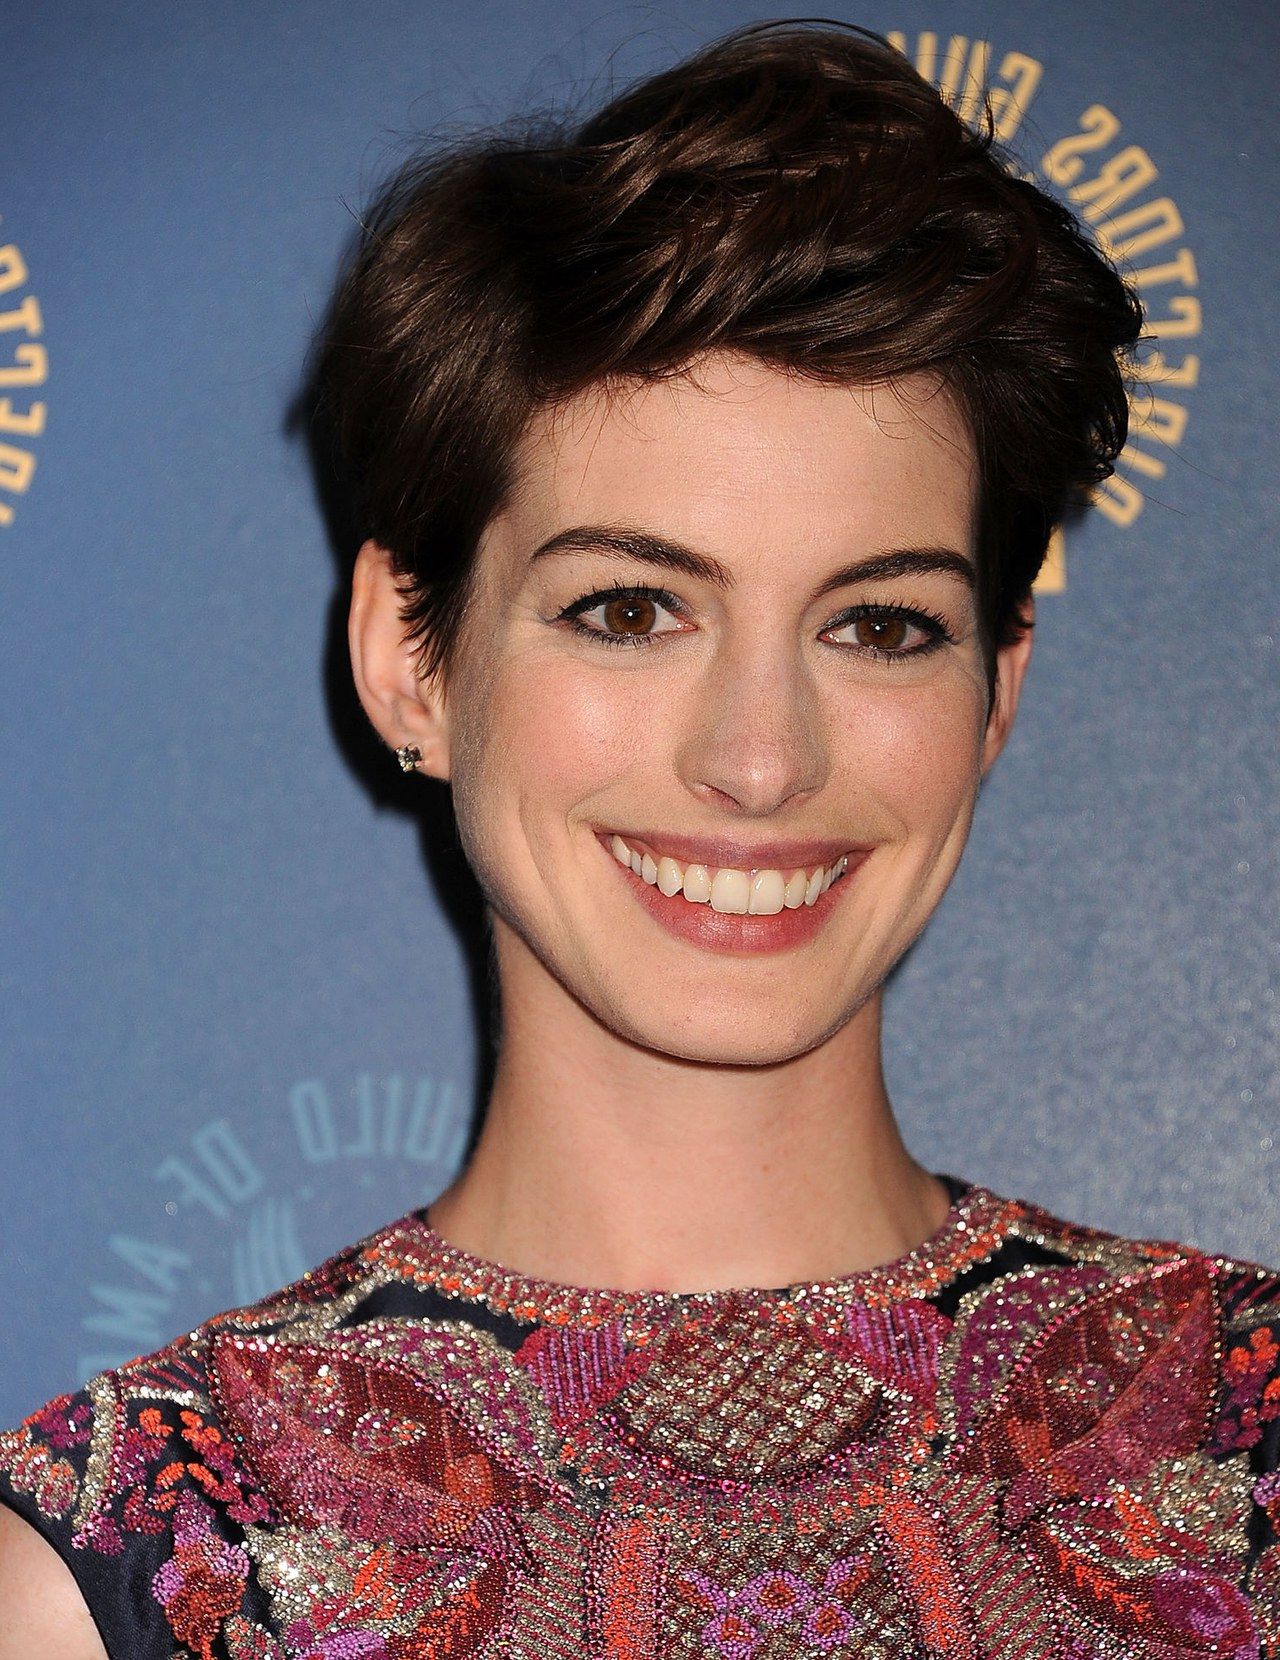 This Is My Favorite Way Anne Hathaway Has Styled Her Short Haircut Pertaining To Anne Hathaway Short Hairstyles (View 3 of 25)